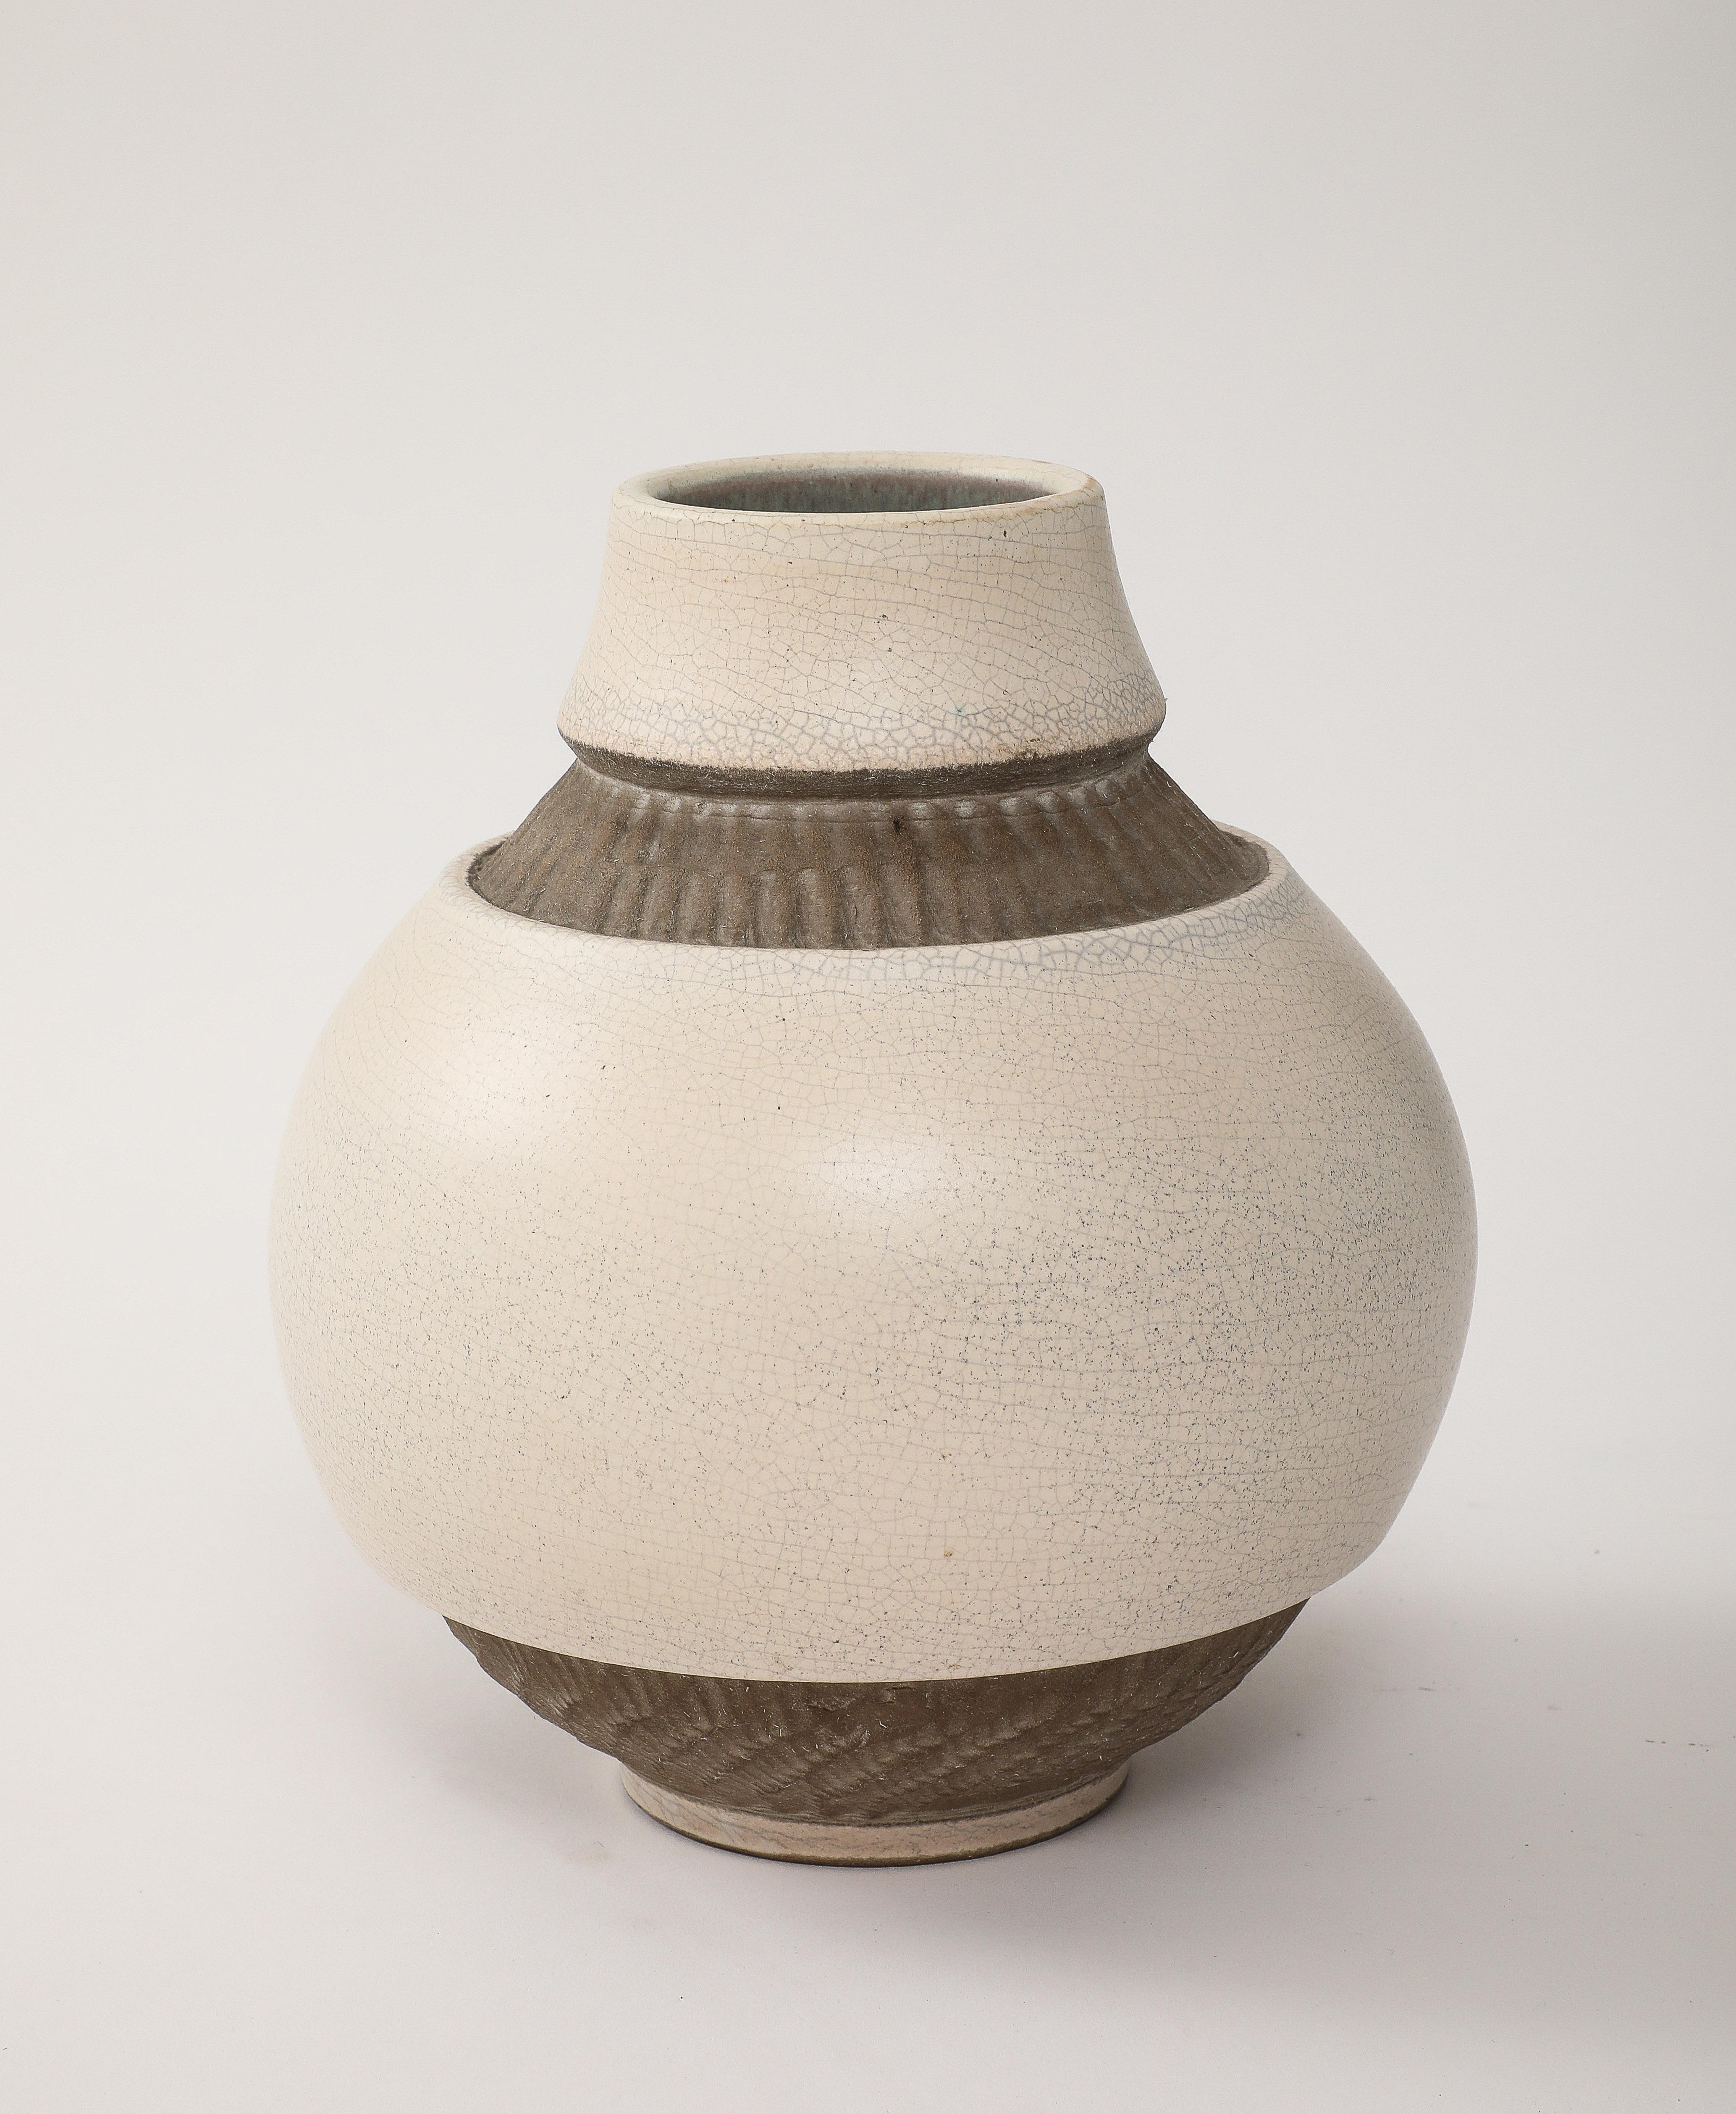 Pol Chambost Off White Crackle Vase, Brown Incised Bands, France, 1940, signed In Good Condition For Sale In Brooklyn, NY